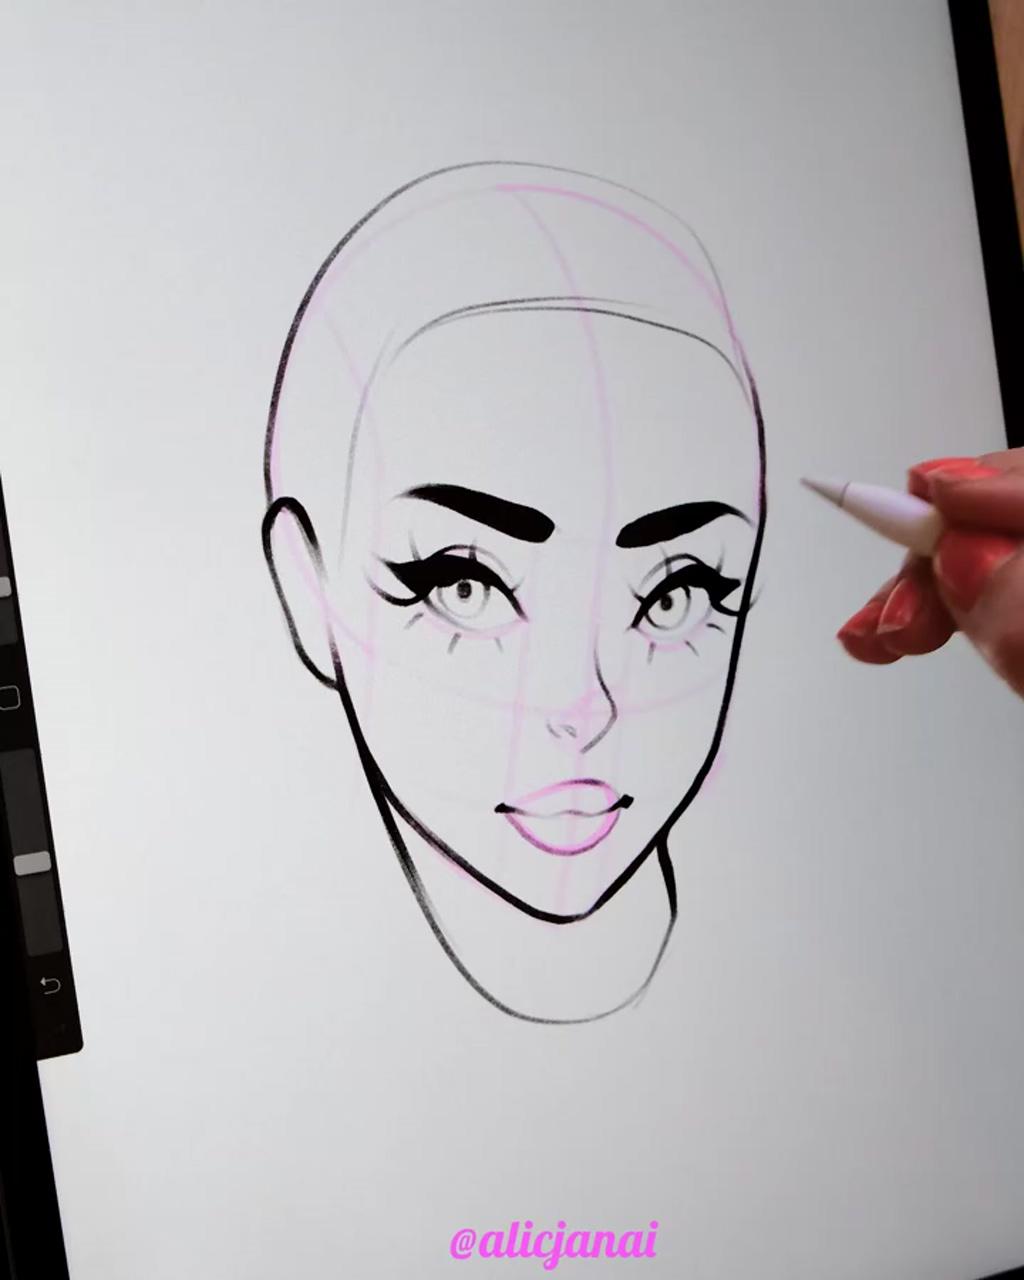 How to draw a face; digital painting tutorials